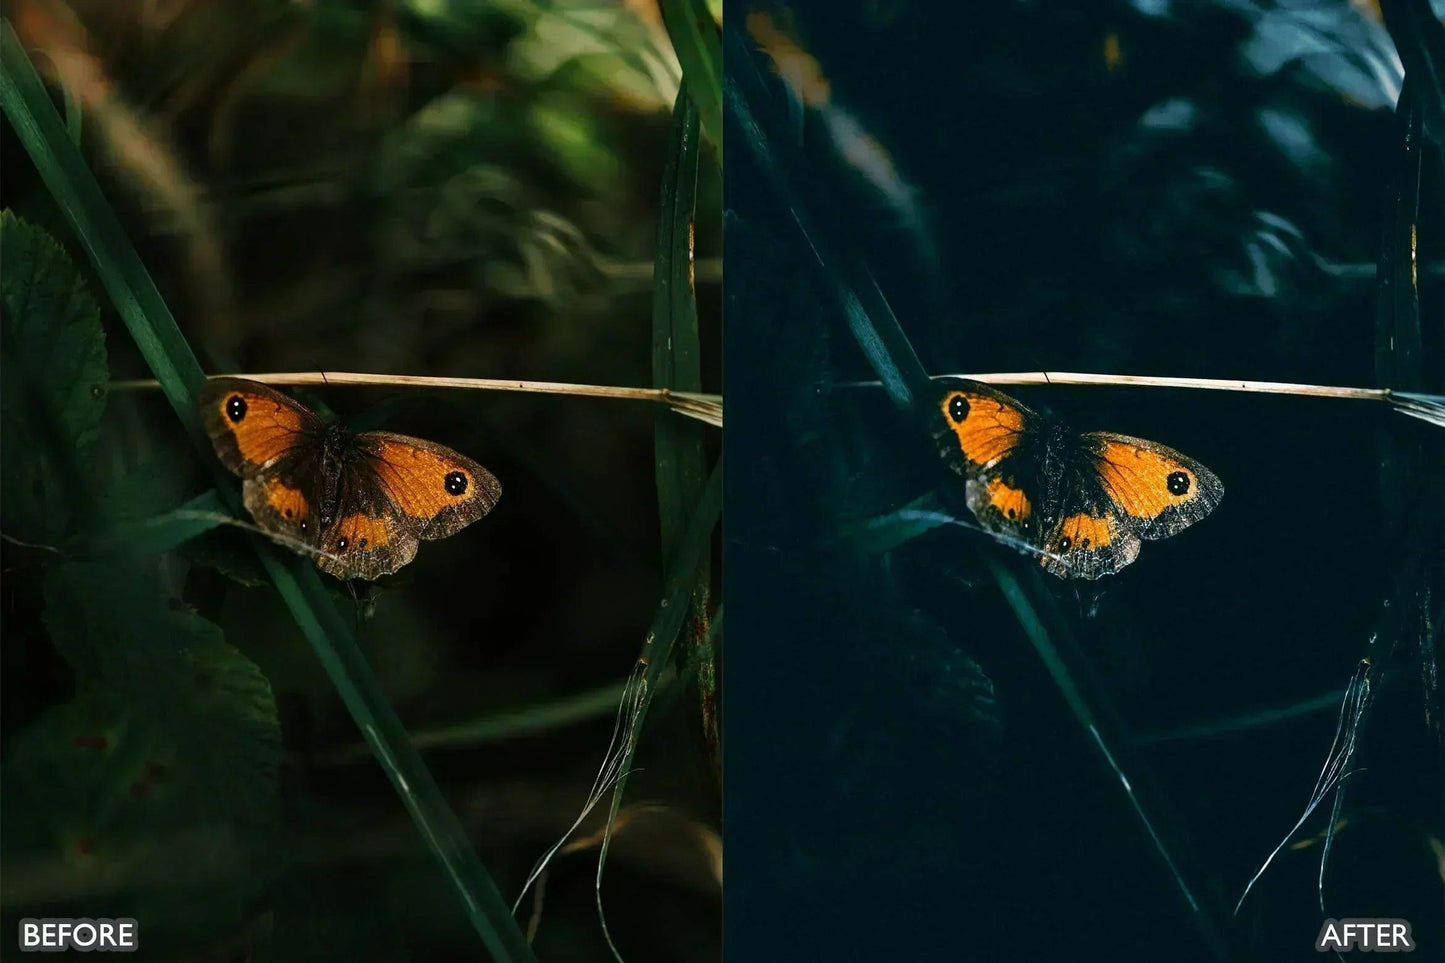 Lightroom Presets For Macro Photos - adobe lightroom presets, instagram presets, lightroom presets, Macro presets, presets before and after, professional lightroom presets - aaapresets.com